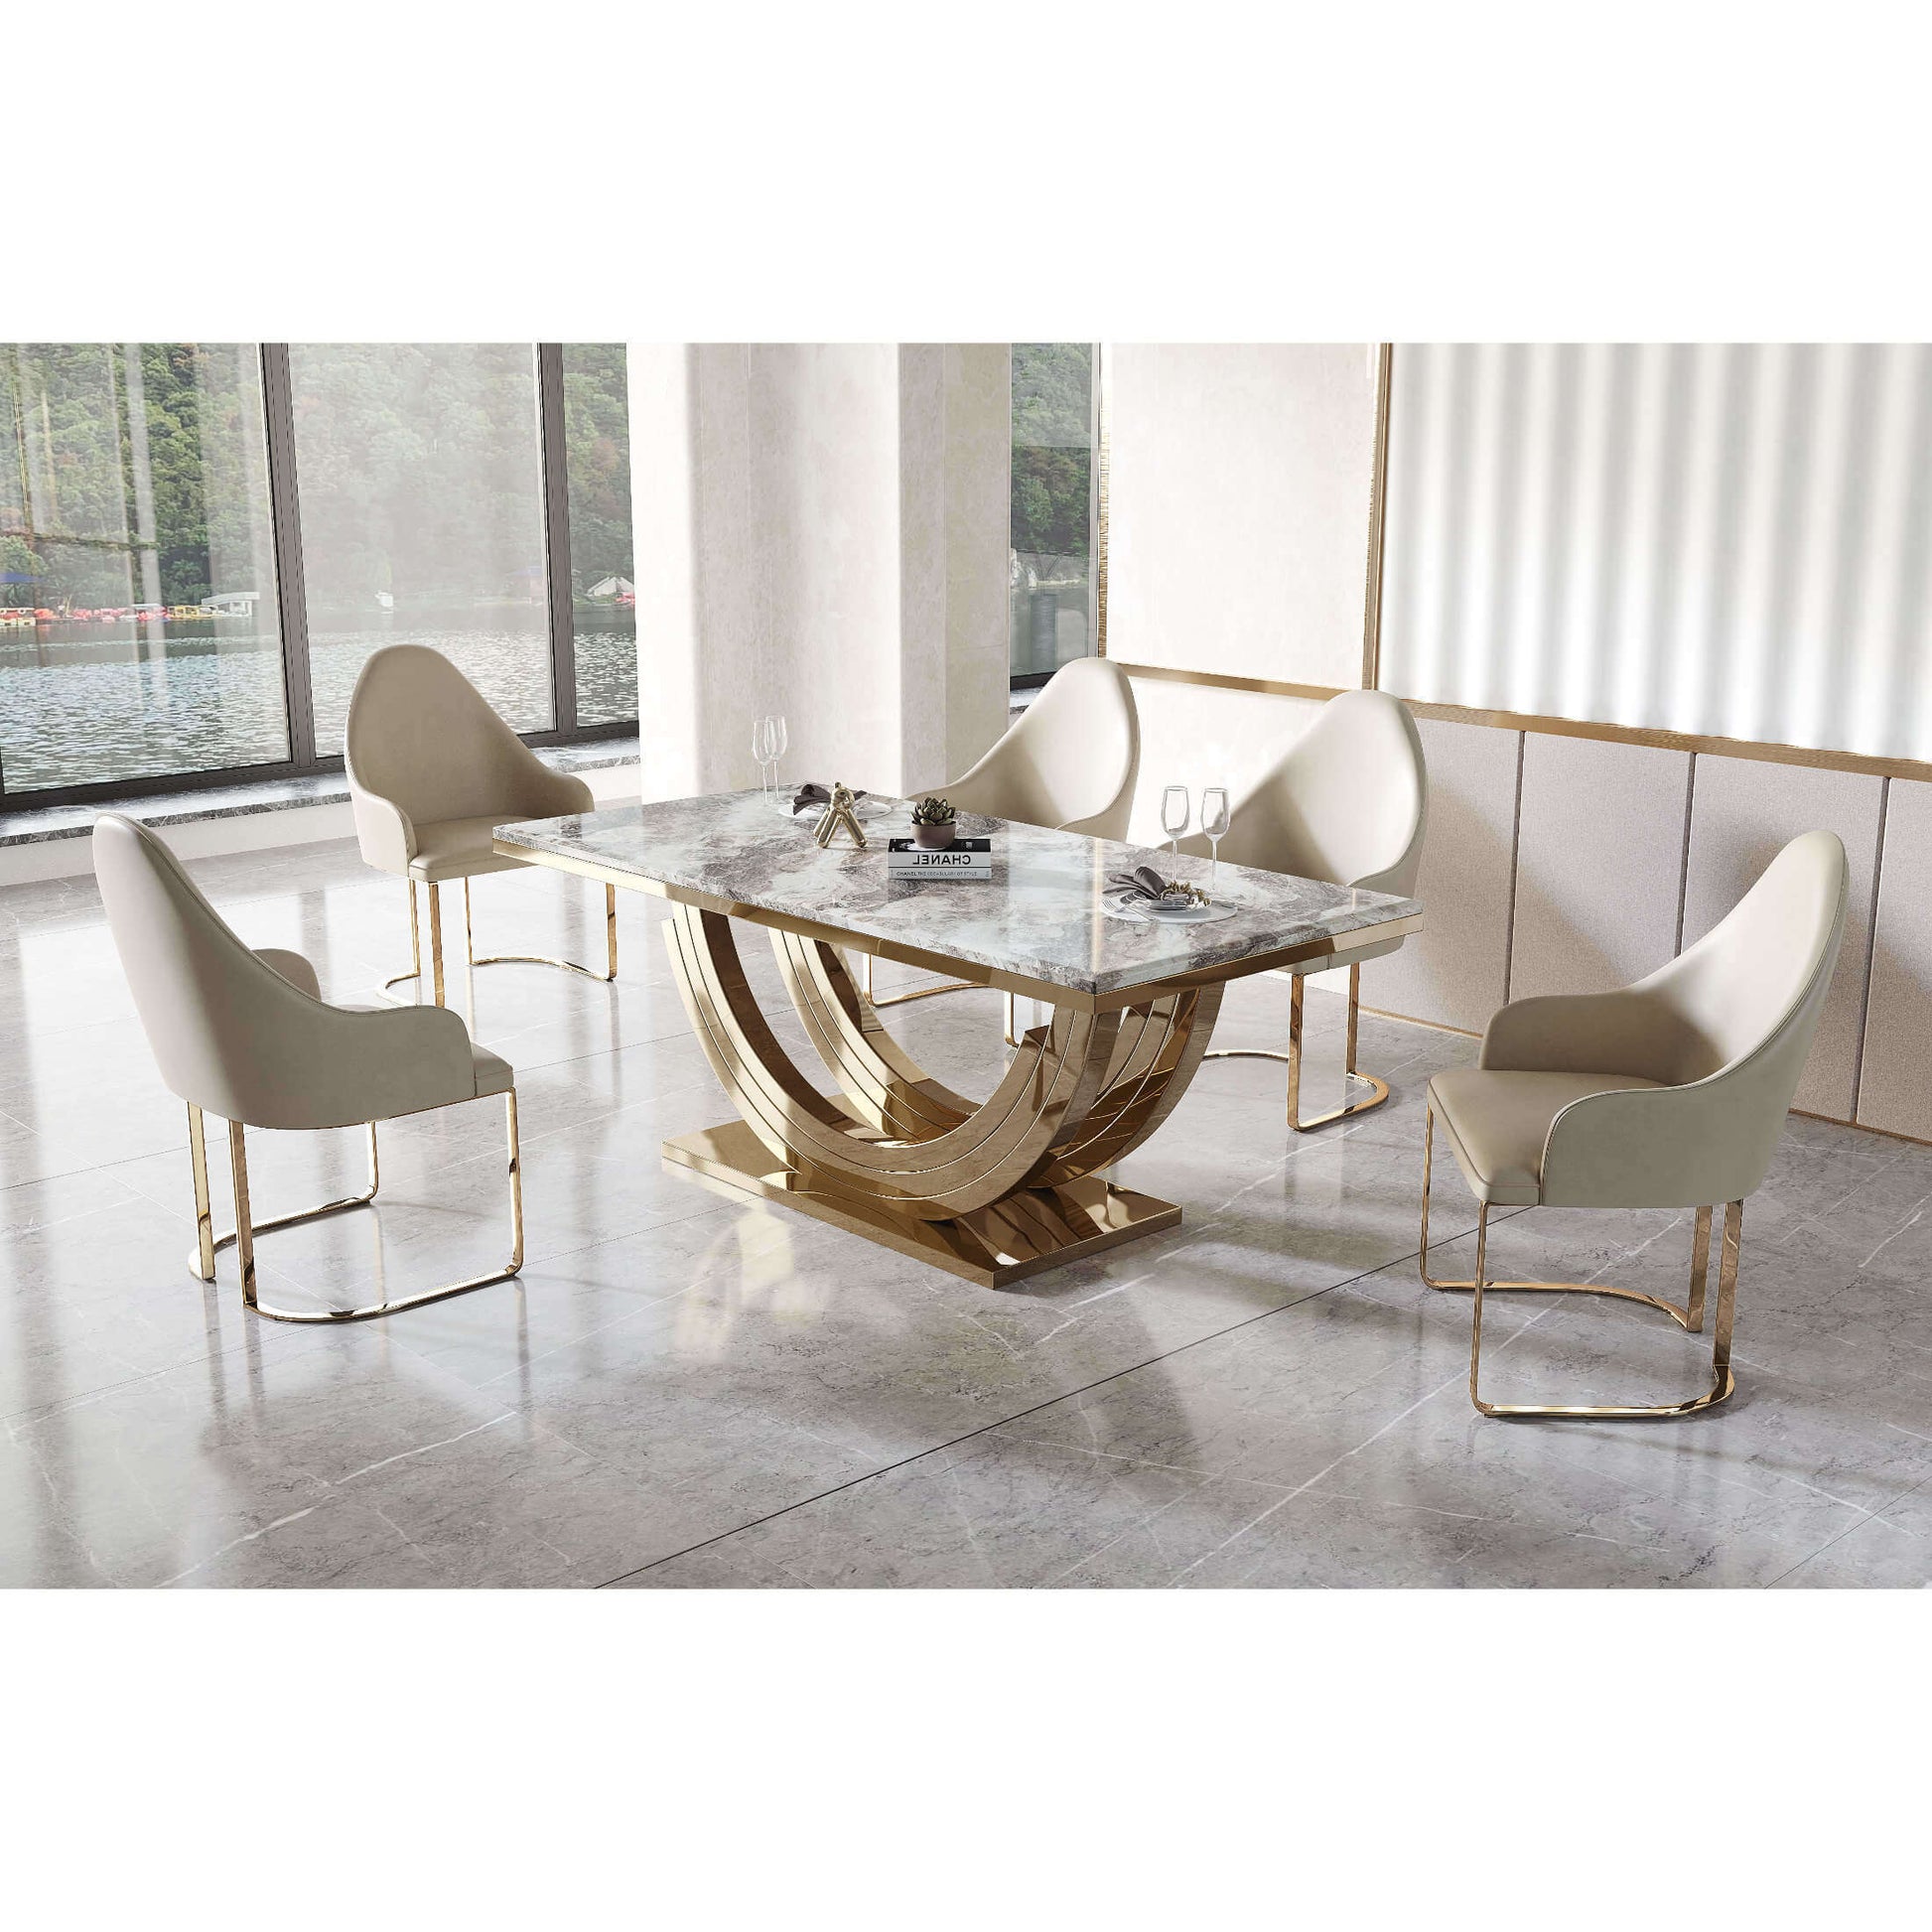 Ashpinoke:Midas Polyurethane Dining Chair Cream with Stainless Steel Legs Gold,Premium Dining,Heartlands Furniture